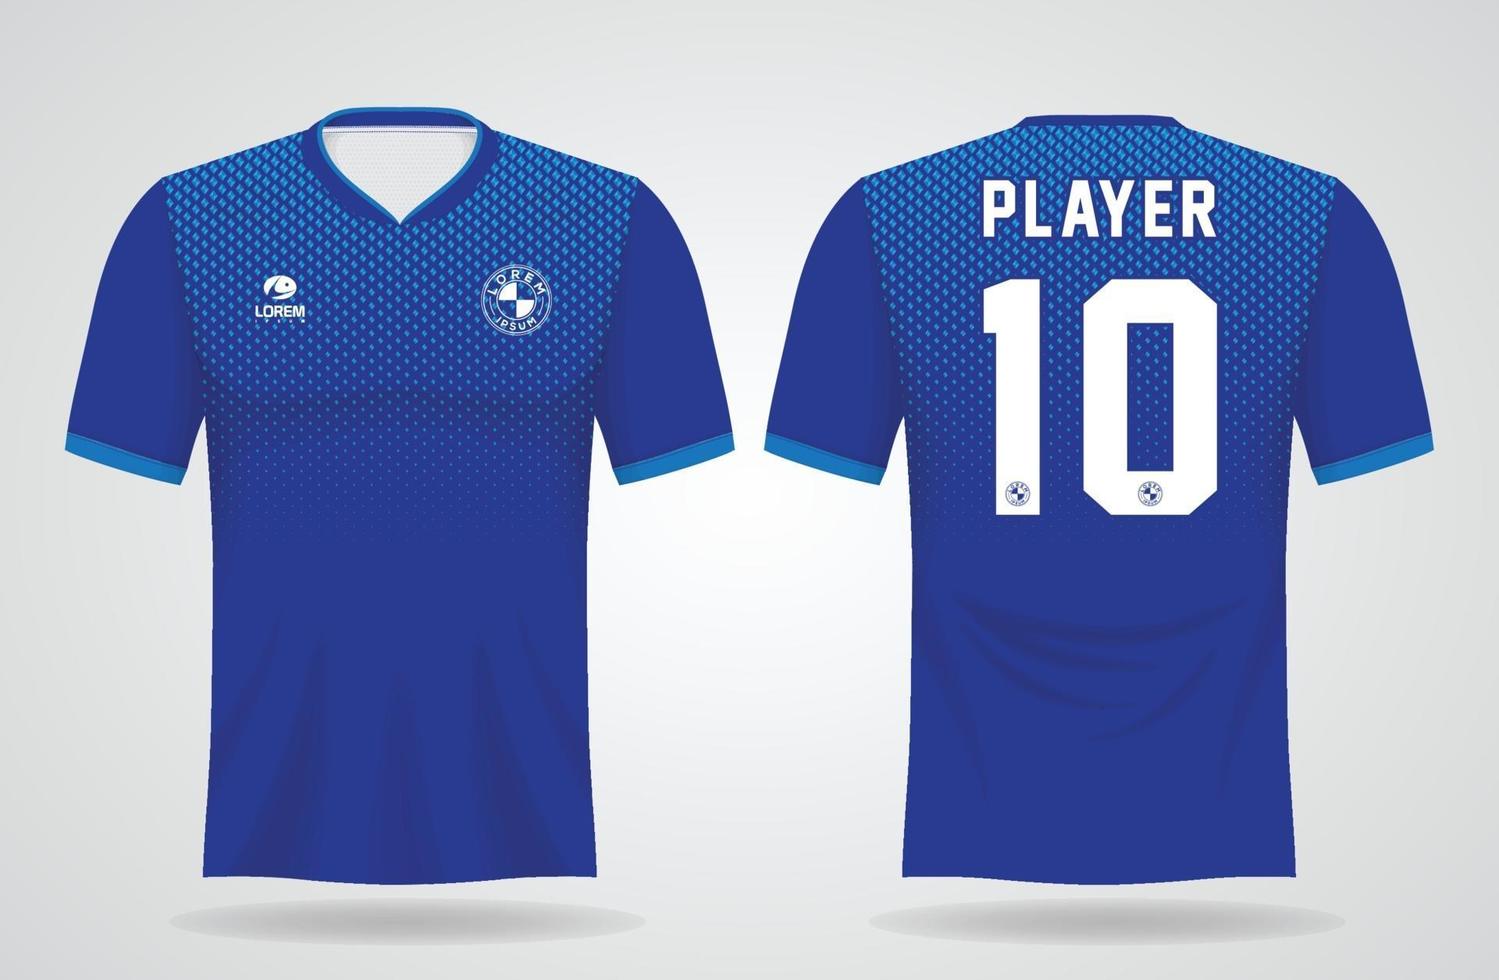 blue sports jersey template for team uniforms and Soccer t shirt design vector